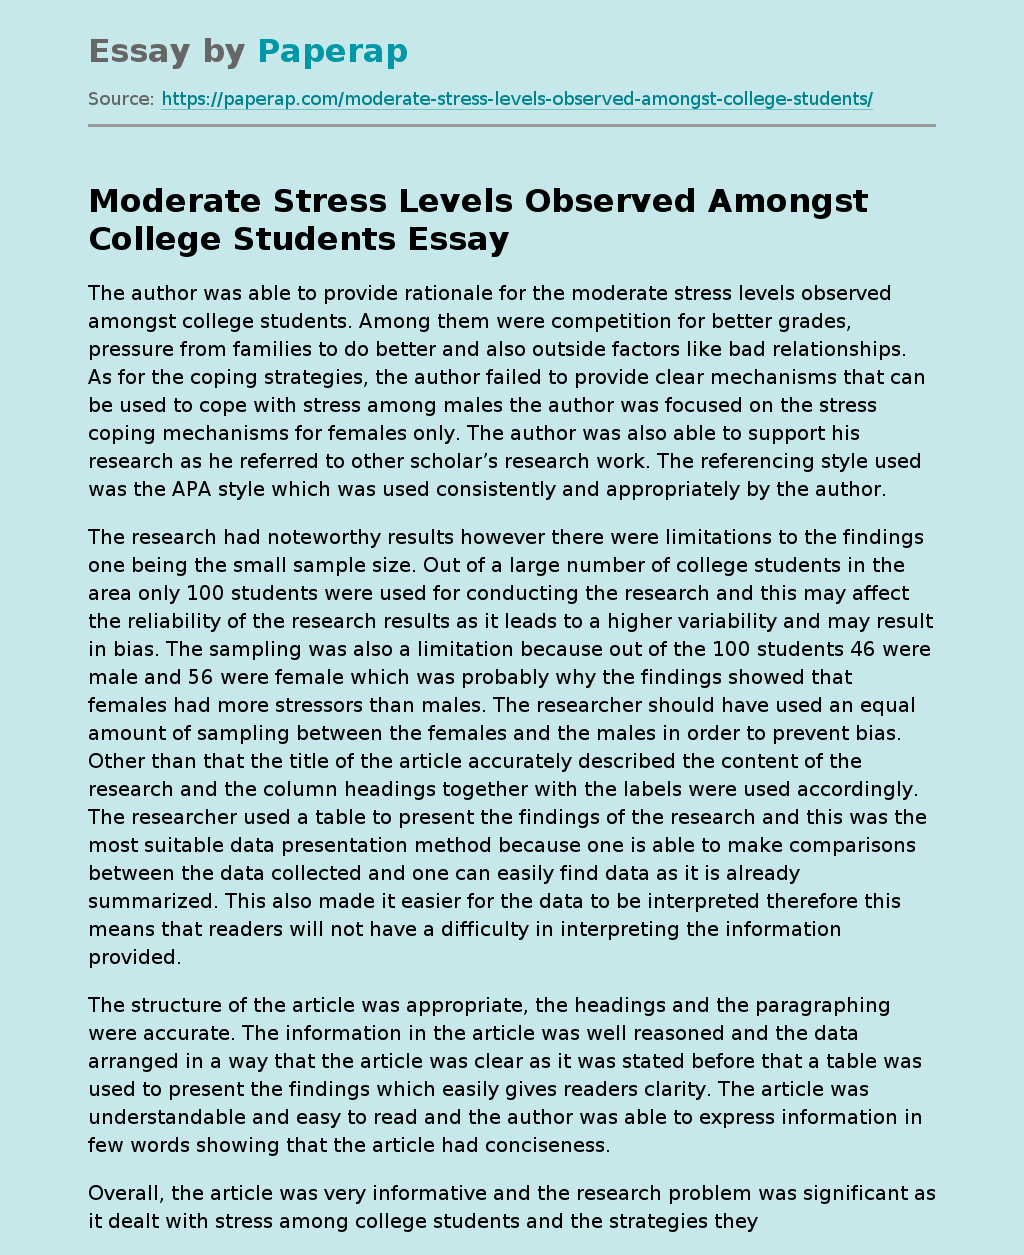 Moderate Stress Levels Observed Amongst College Students